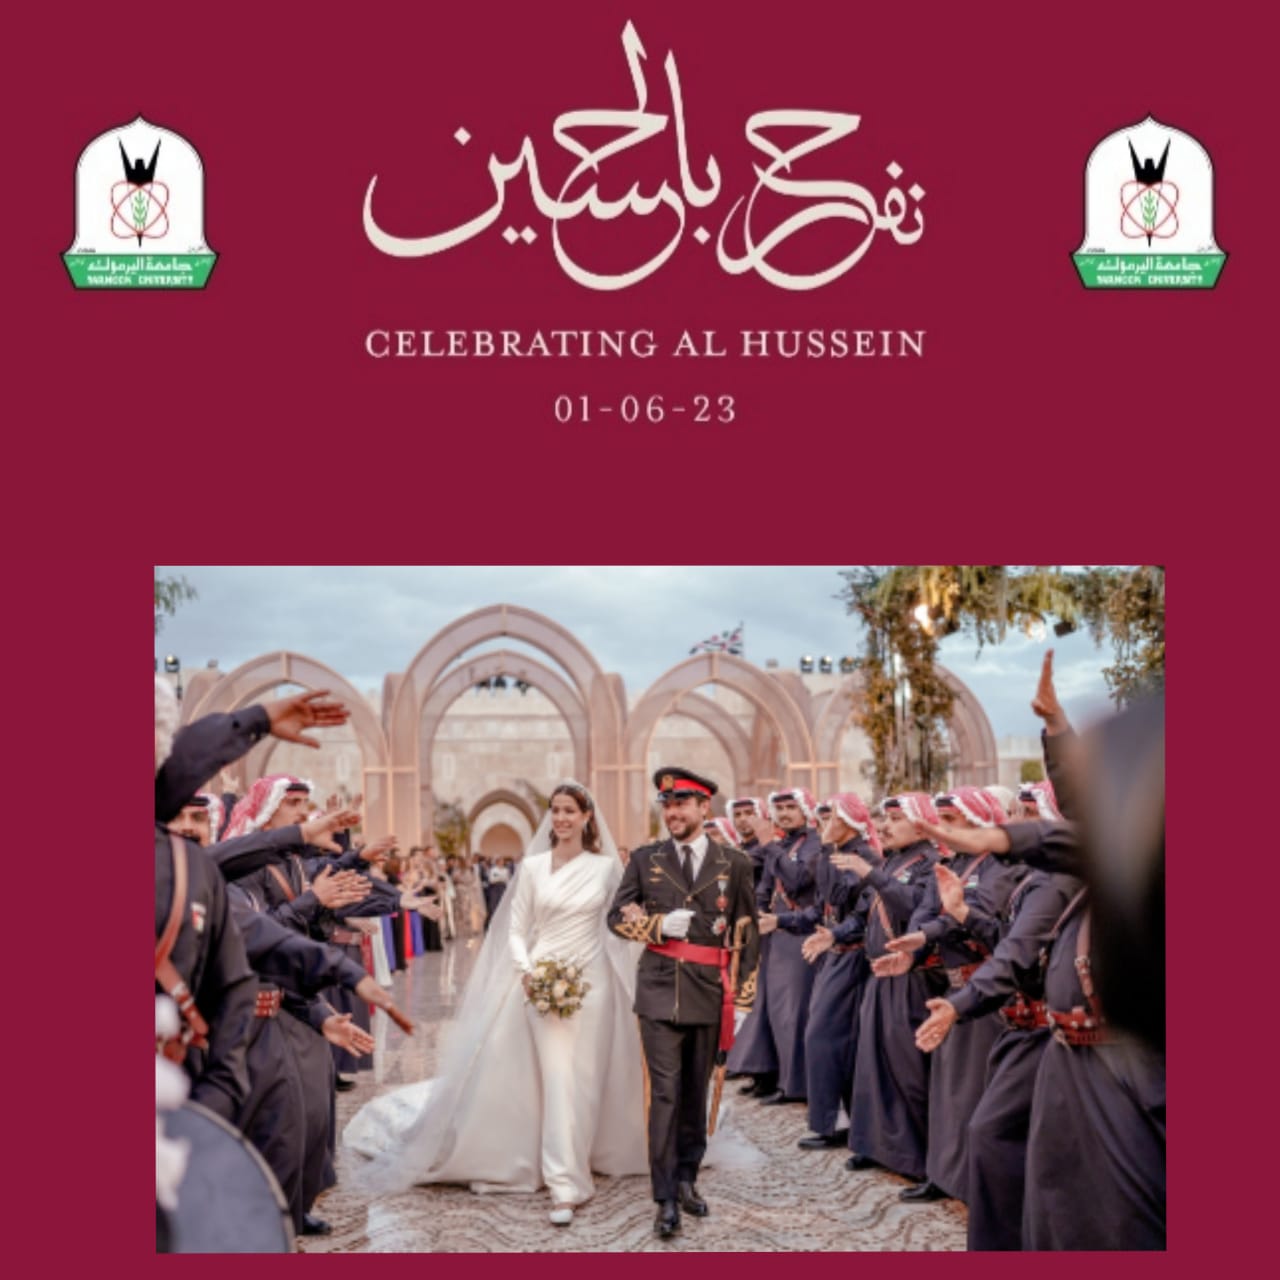 Yarmouk Congratulates the Nation on the Auspicious Wedding of His Highness the Crown Prince